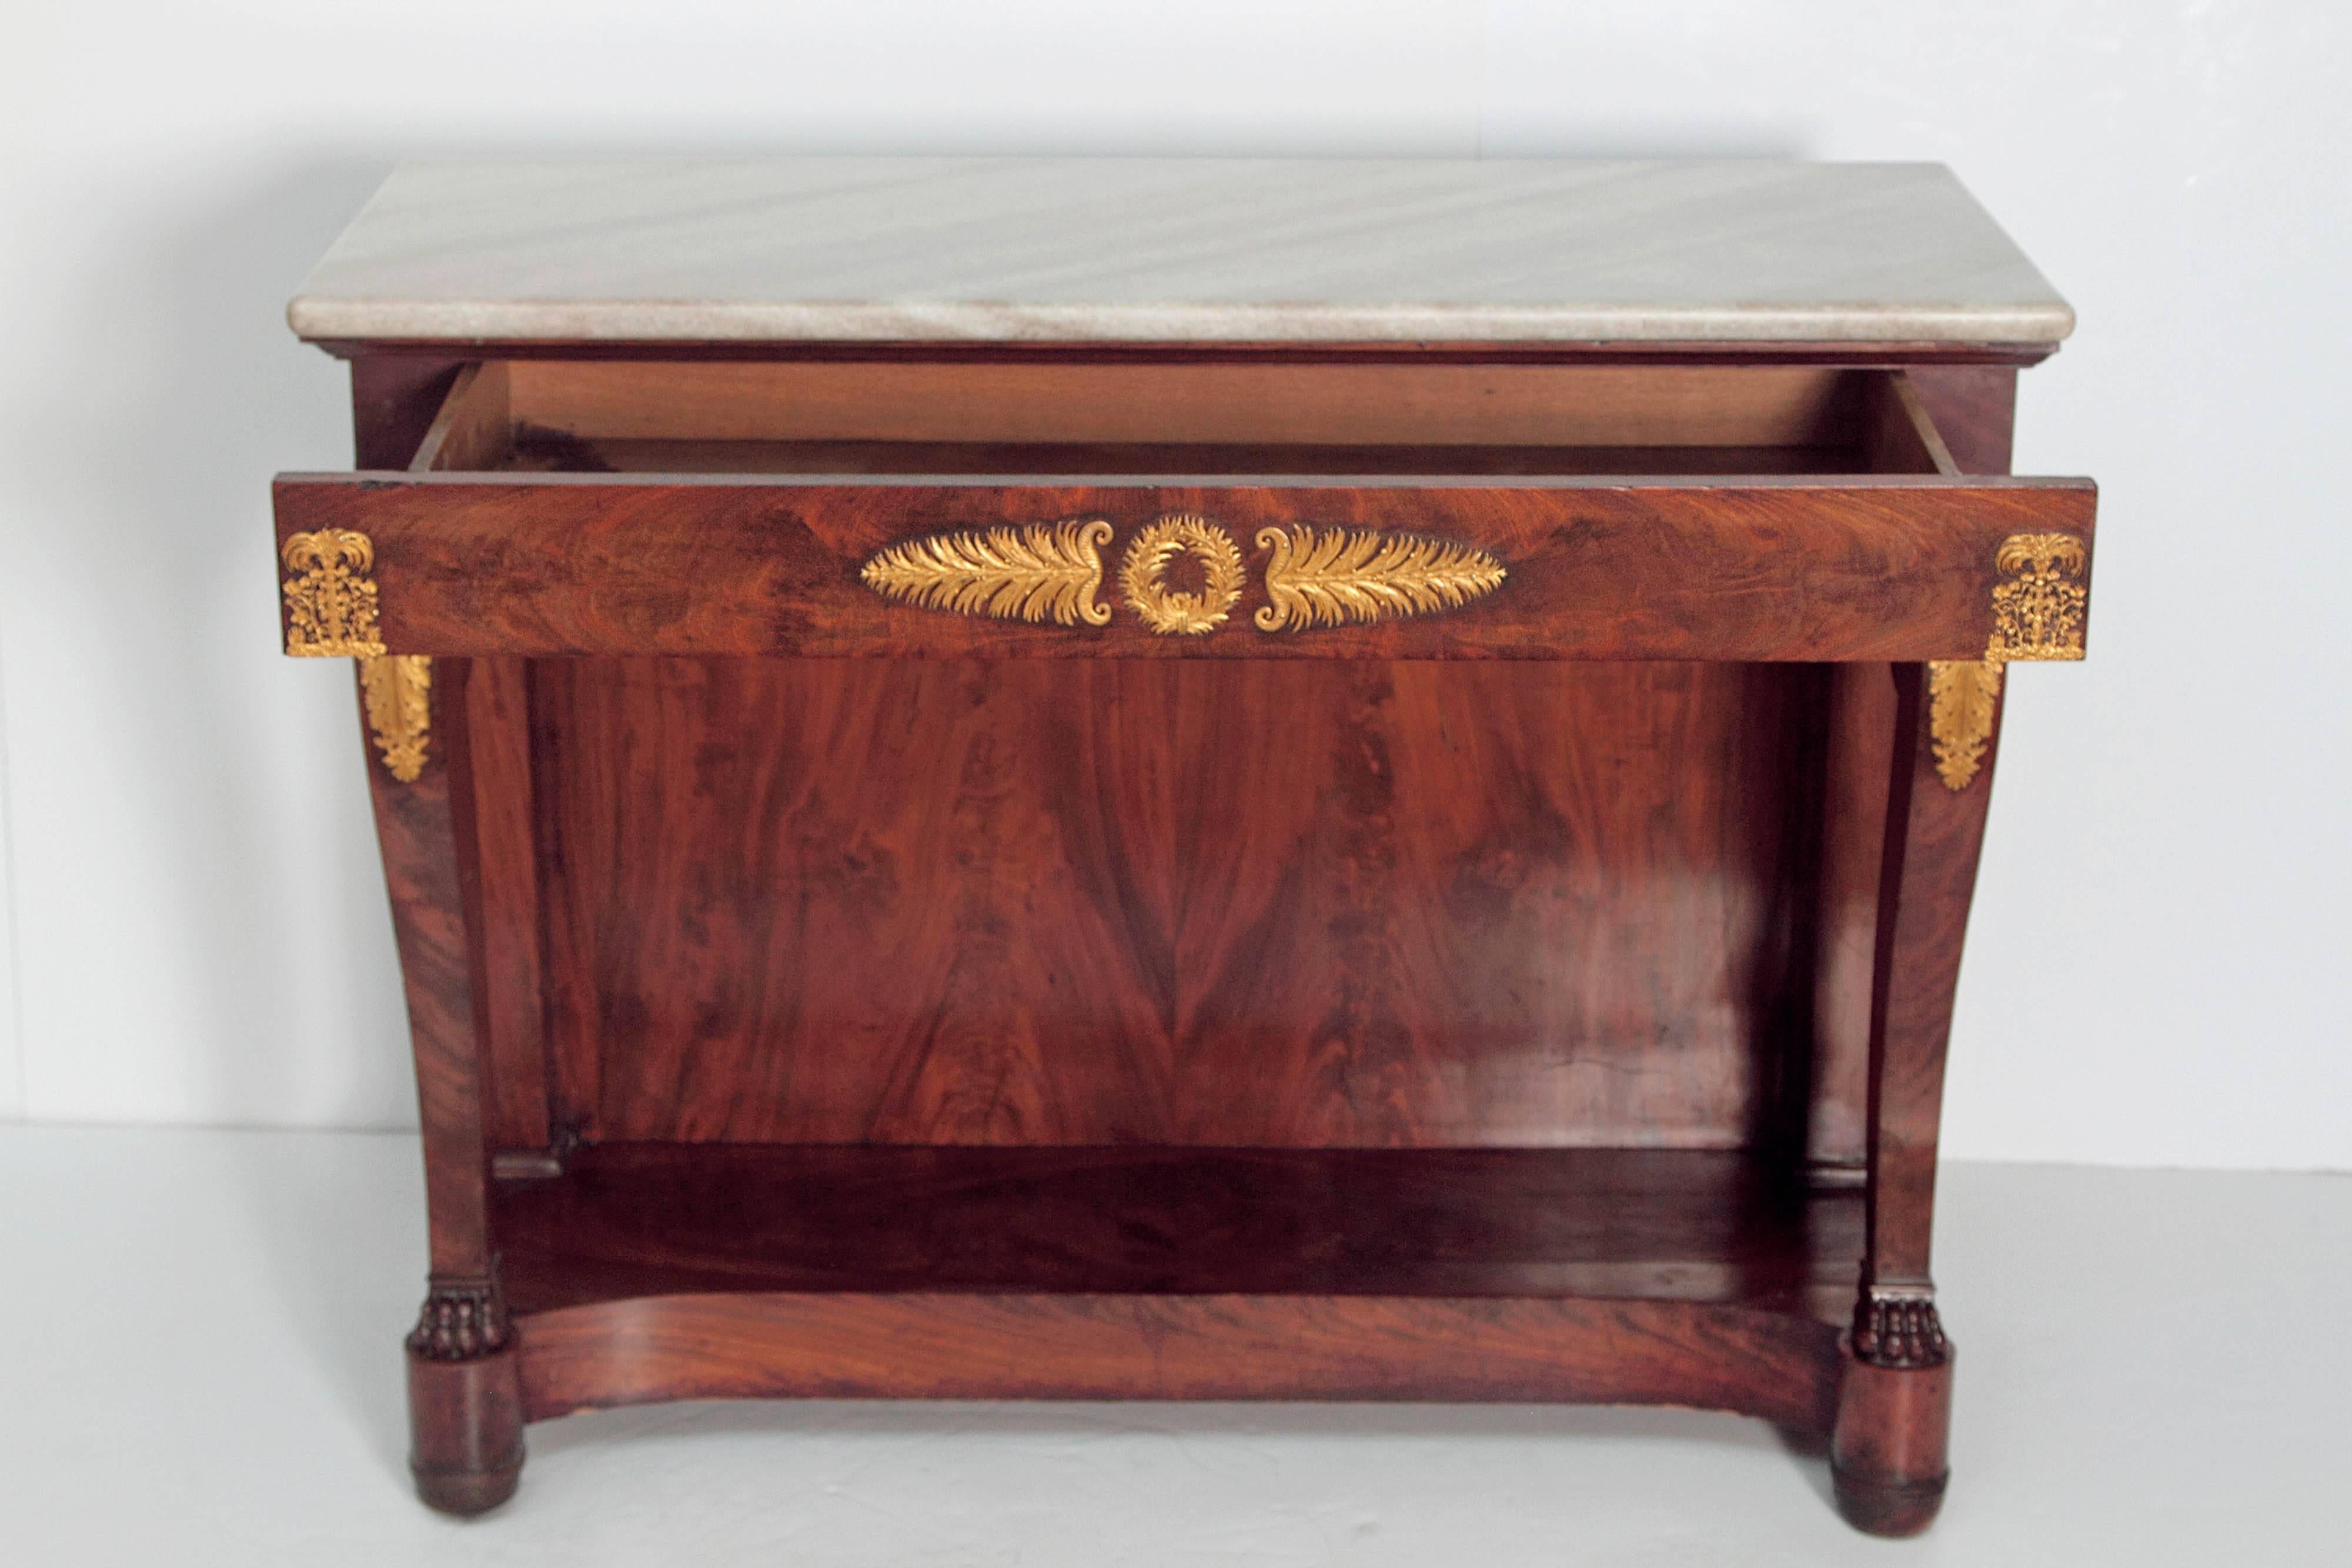 An elaborate early 19th century German neoclassic period console. Bookmatched mahogany with grayish white marble top. Curved legs with ormolu palm trees and grapevines above acanthus leaves at knees and paw feet. Wreath and palm leaves centre apron.